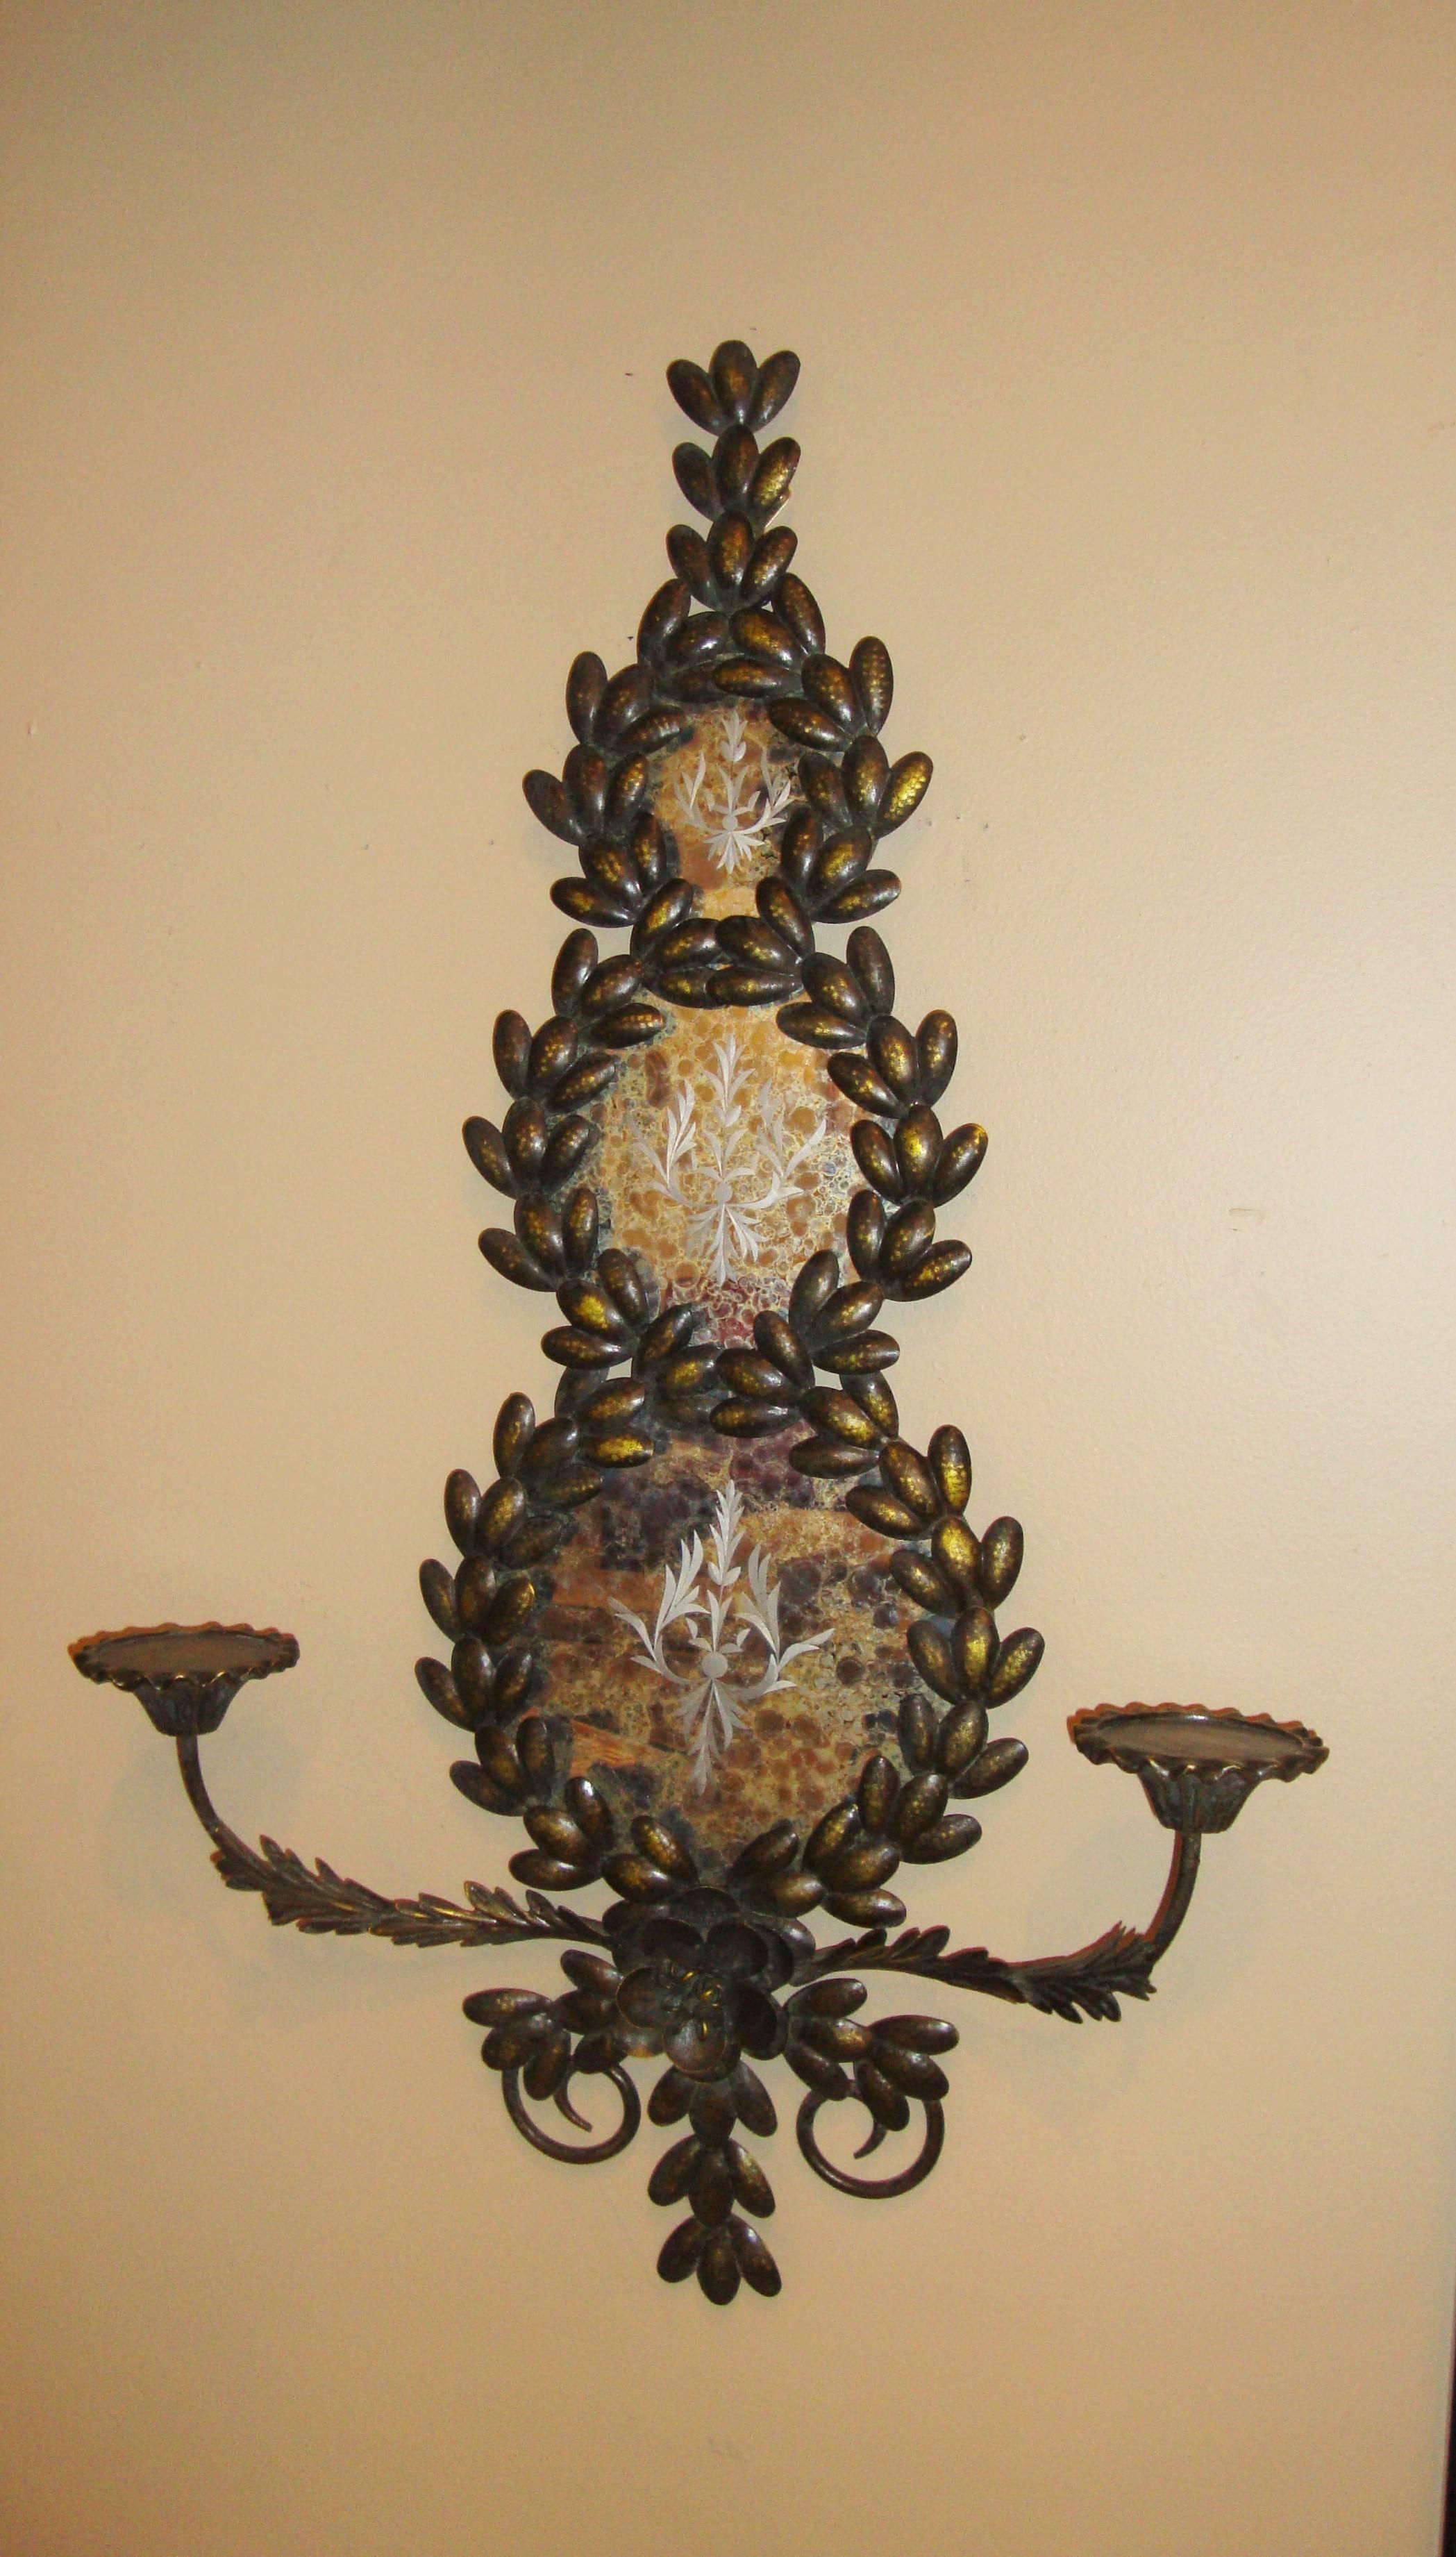 Pair of mirrored and candle arm wall sconces. With round mirrors and metal candleholders set in a fame of leaf and vines with a large center rose on the bottom.